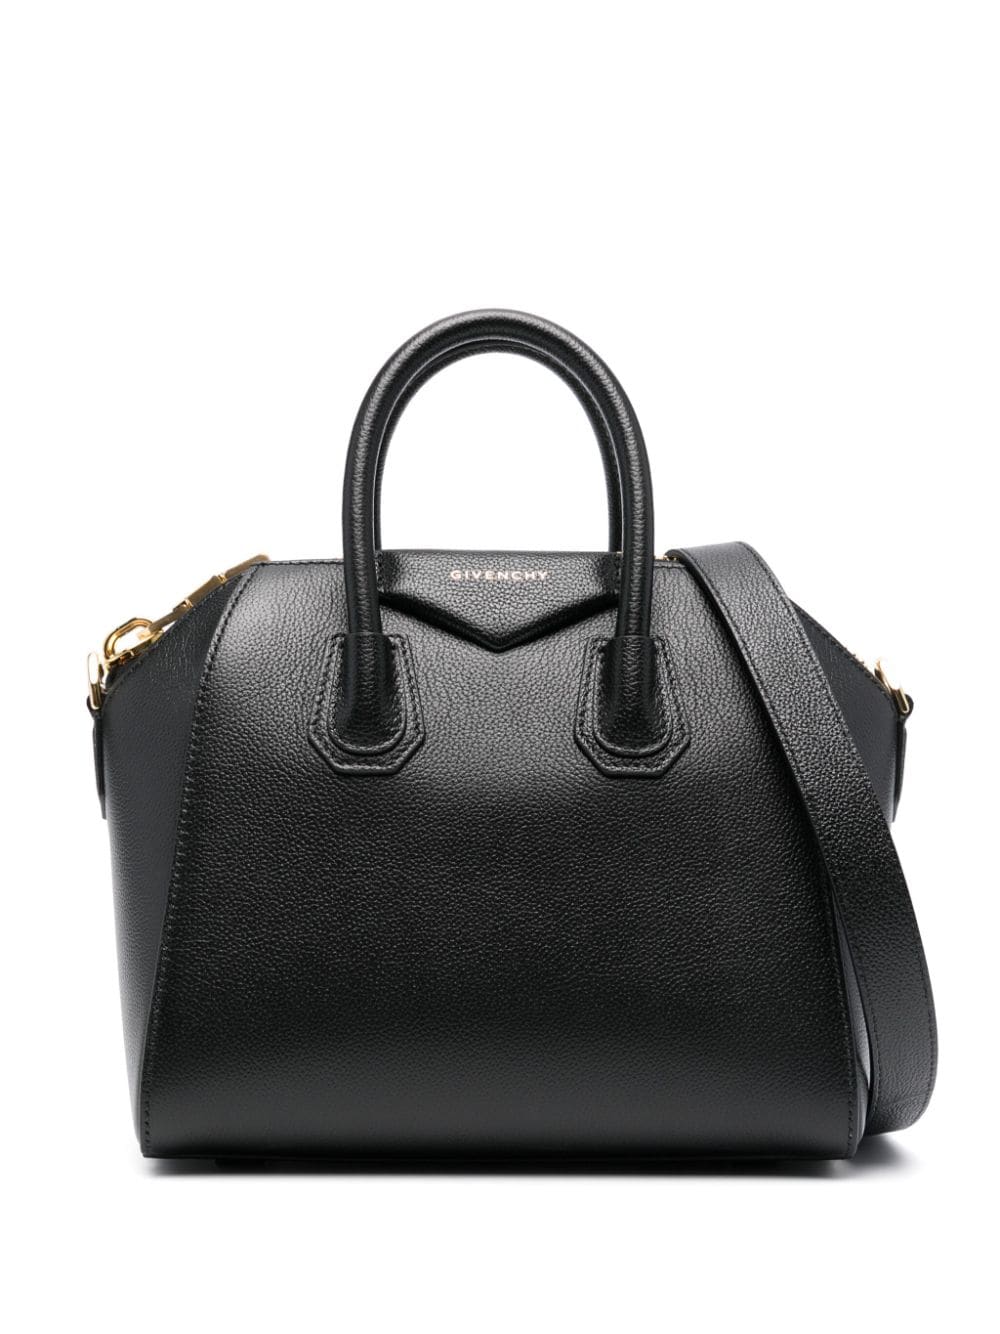 Shop Givenchy Black Leather Handbag With Gold-tone Hardware And Detachable Strap For Women